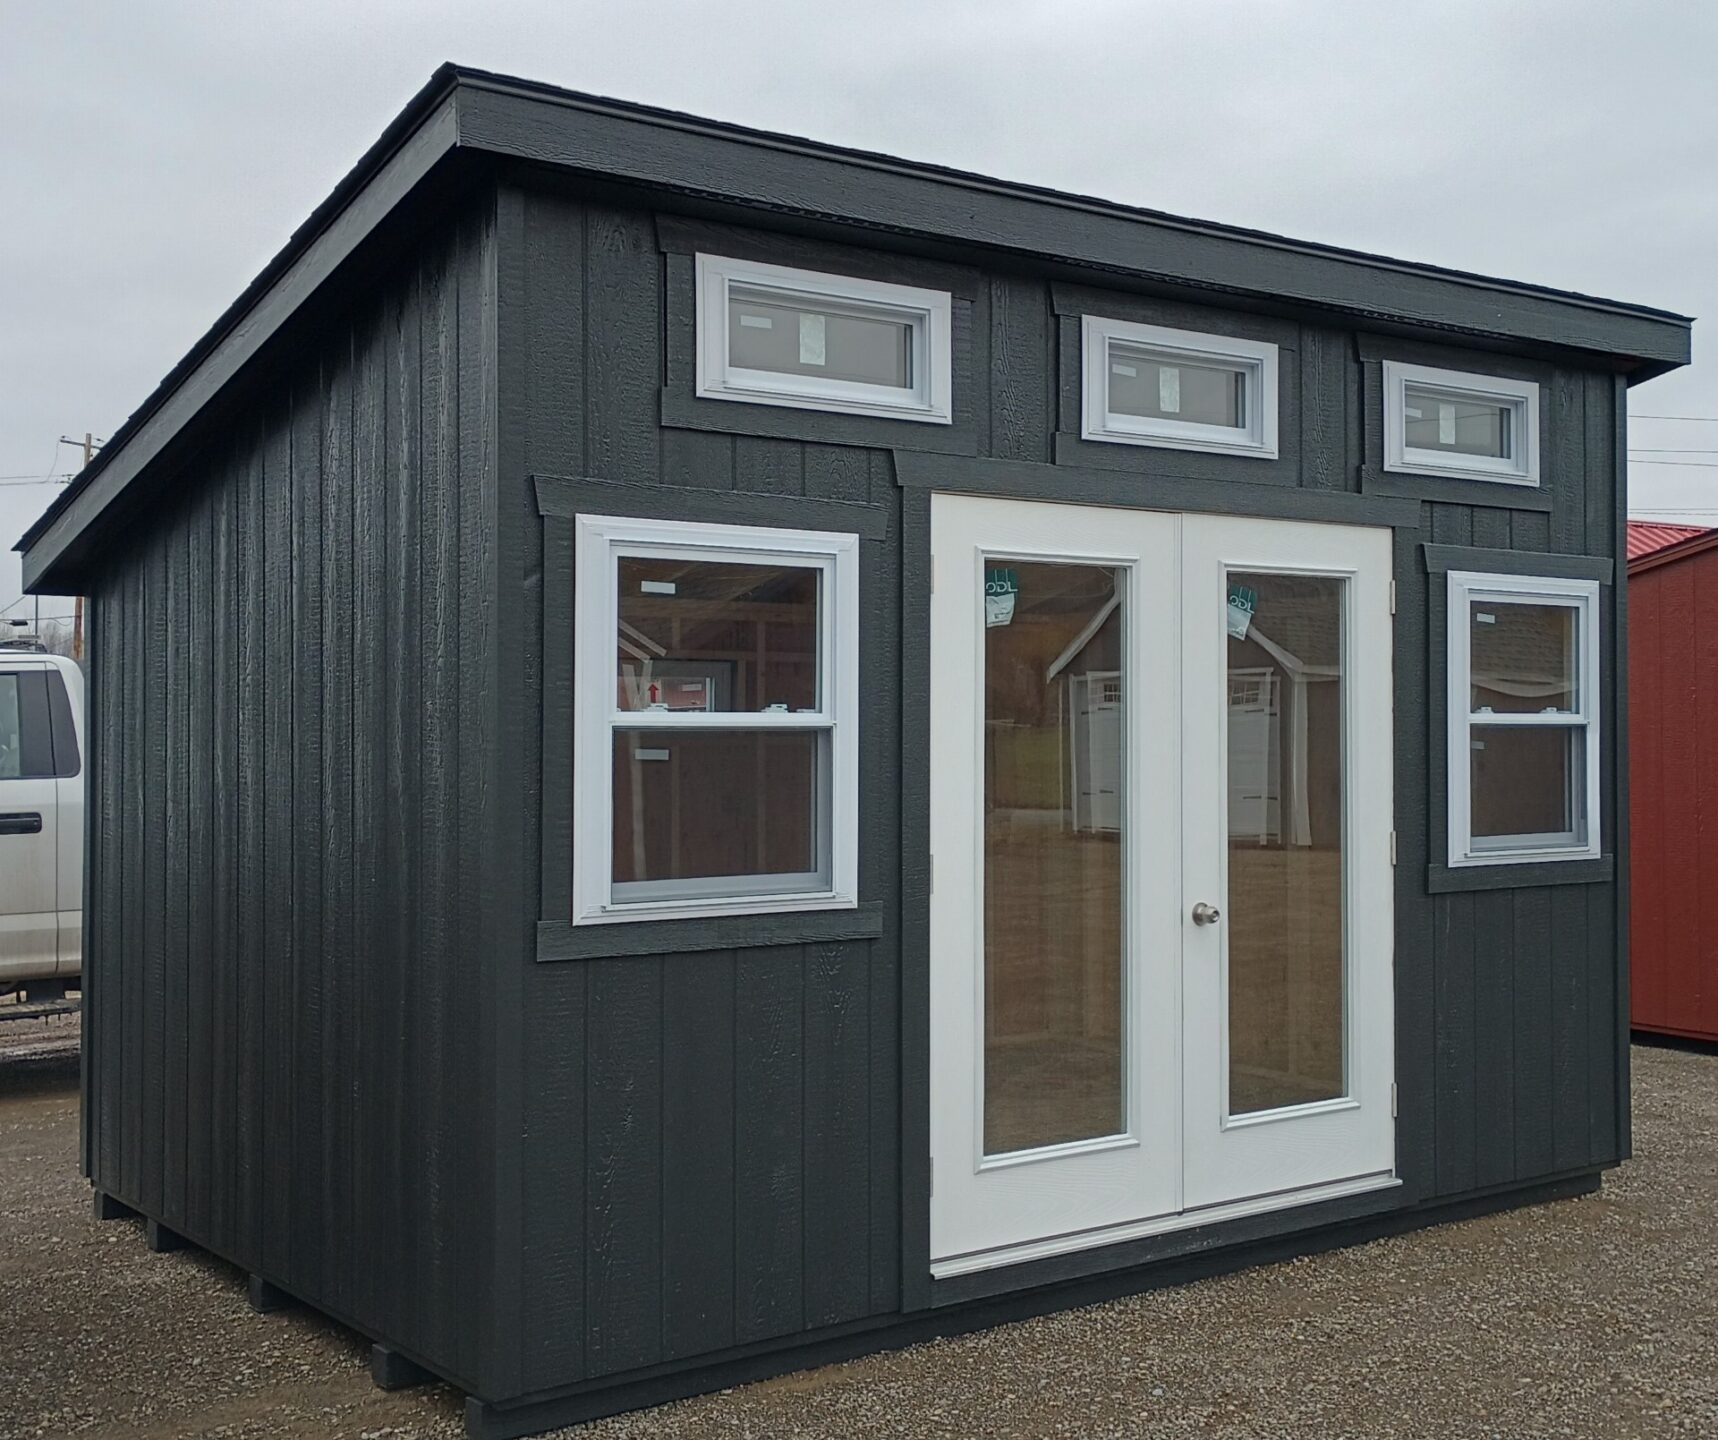 One slant style shed with french doors and transom windows